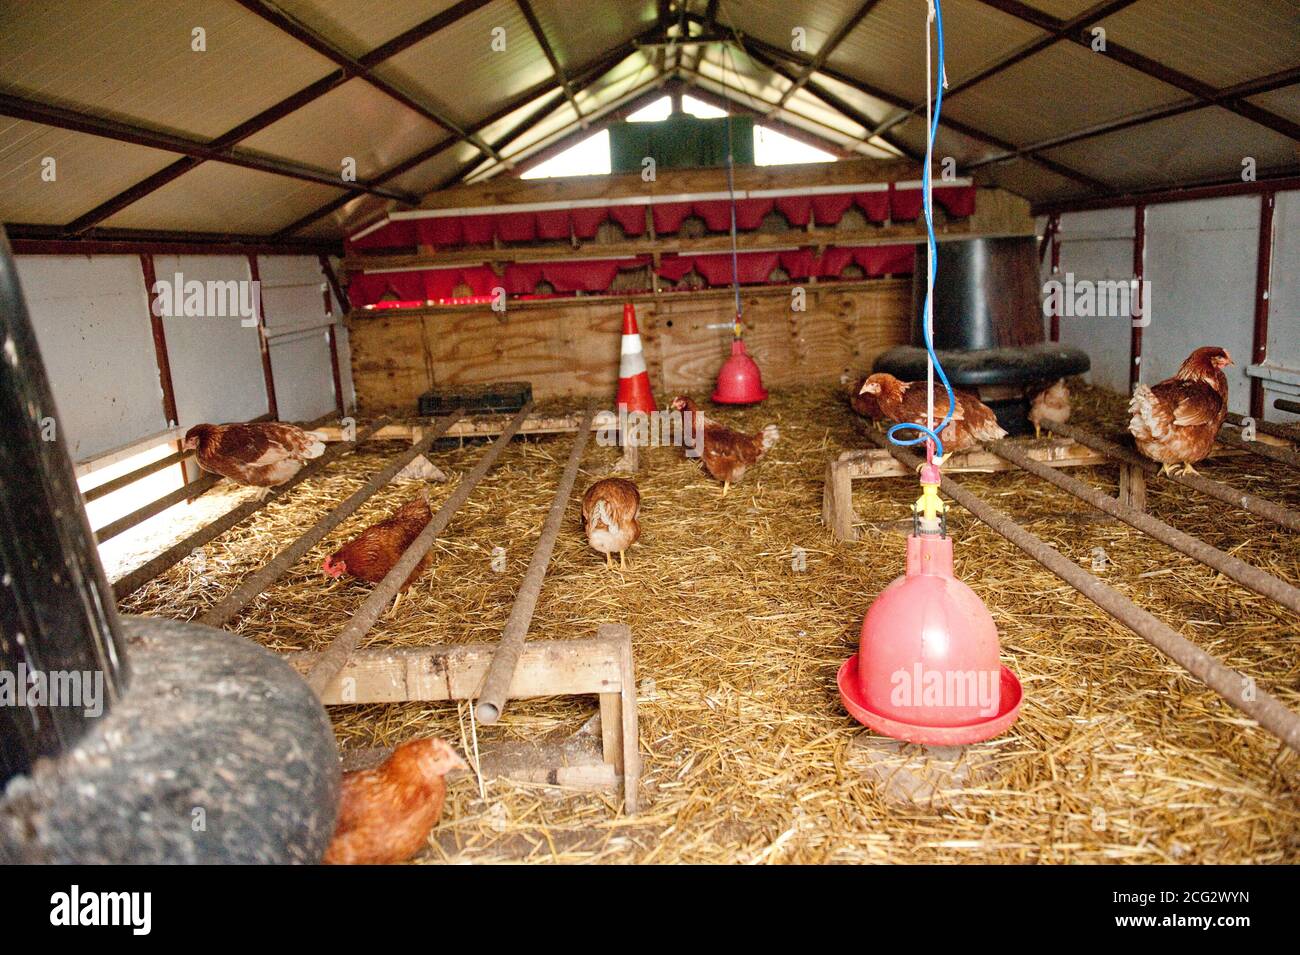 inside a commercial free range chicken house Stock Photo